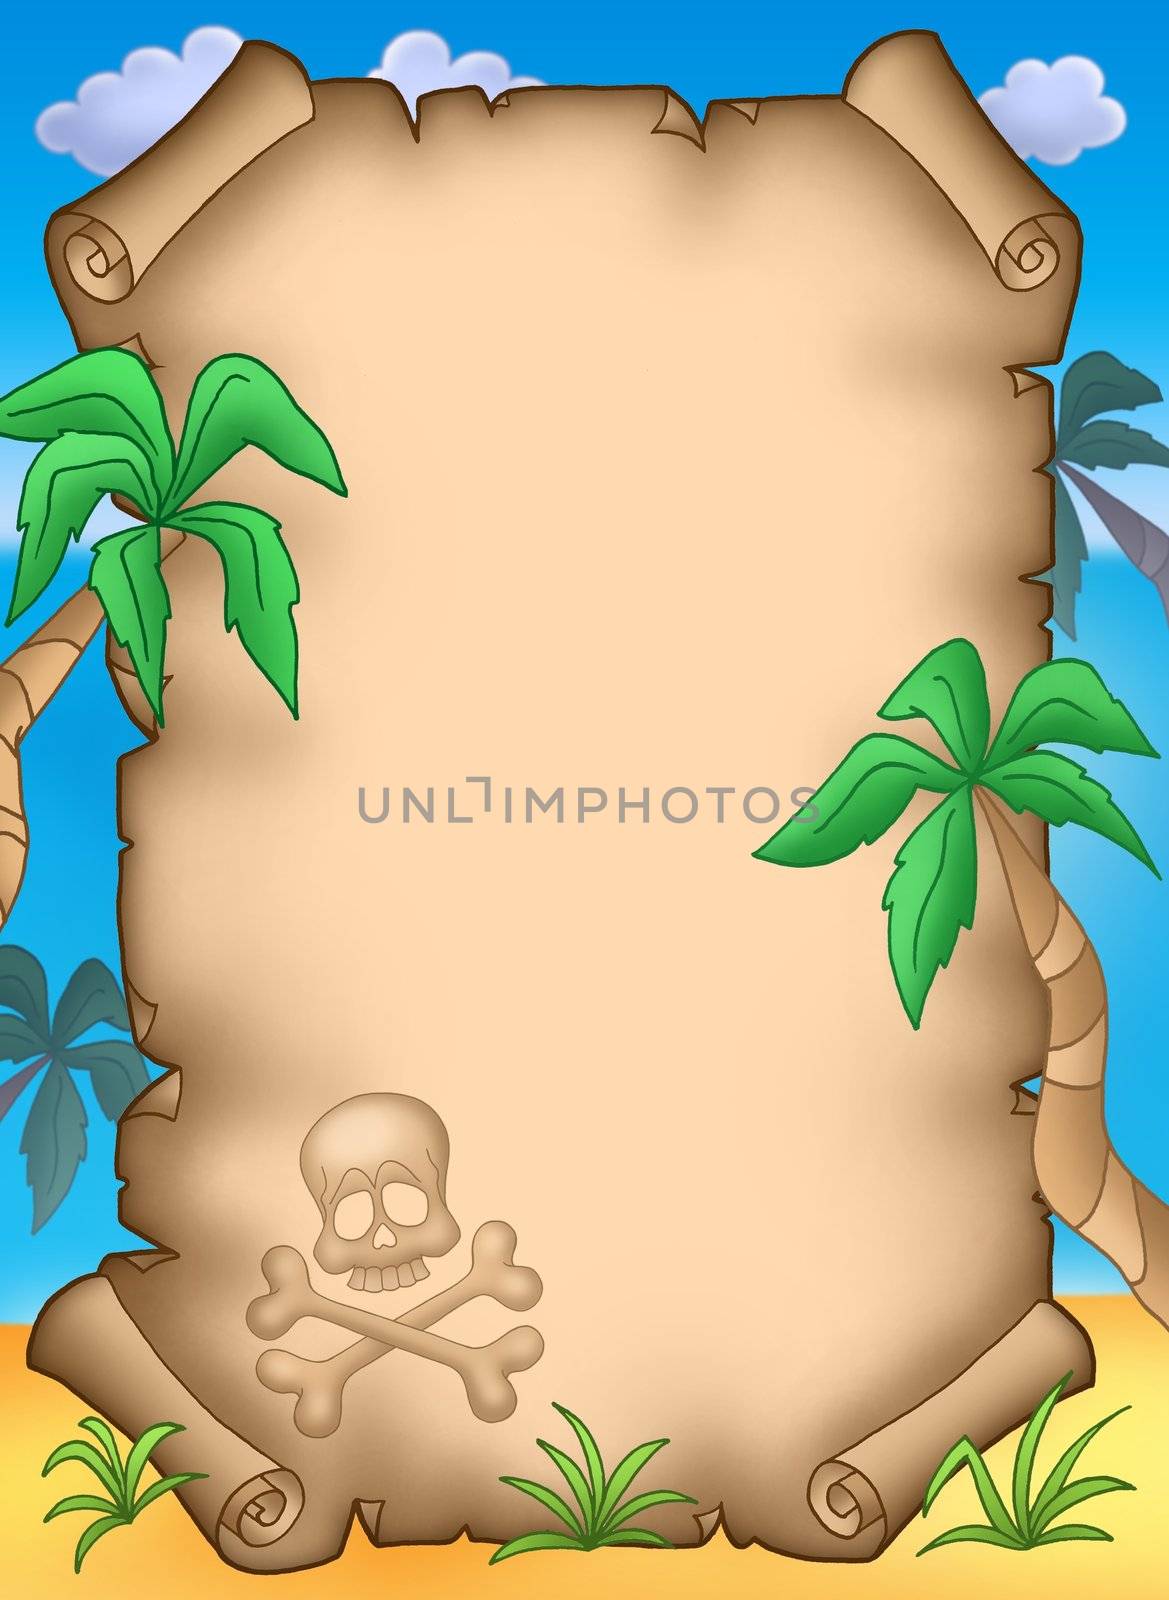 Pirate parchment with palms - color illustration.